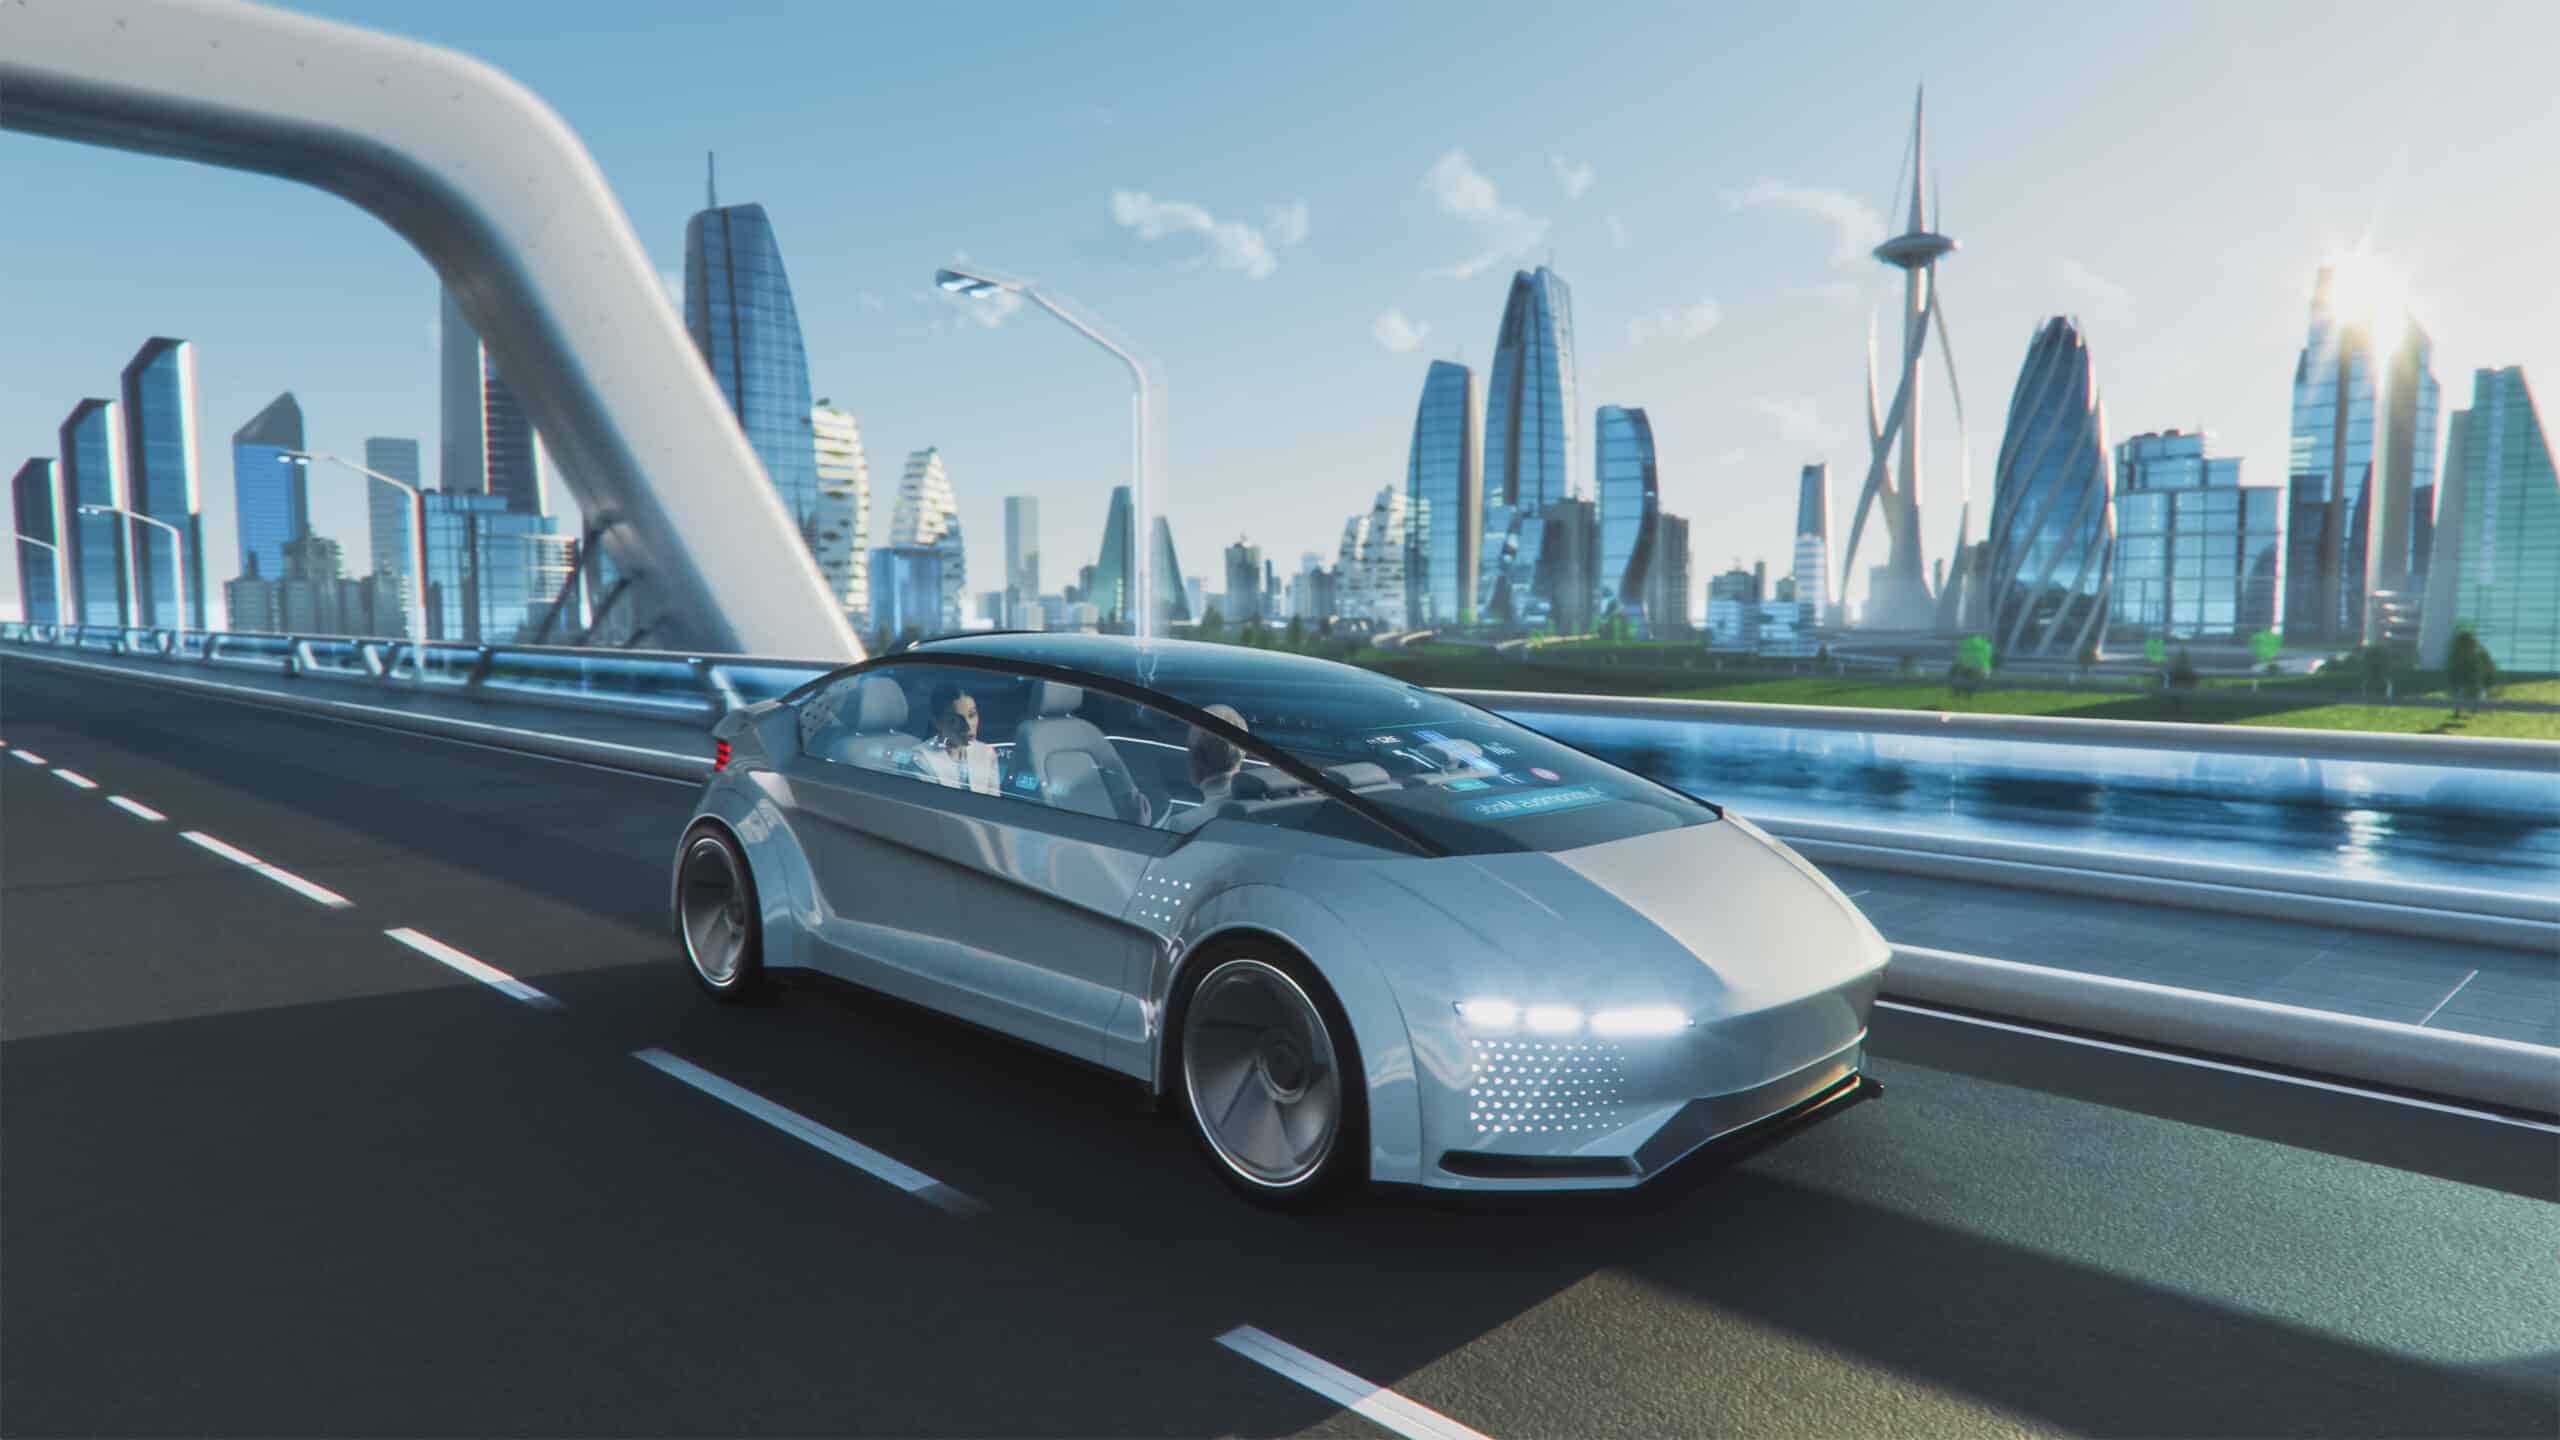 Smart roads and the future of urban mobility